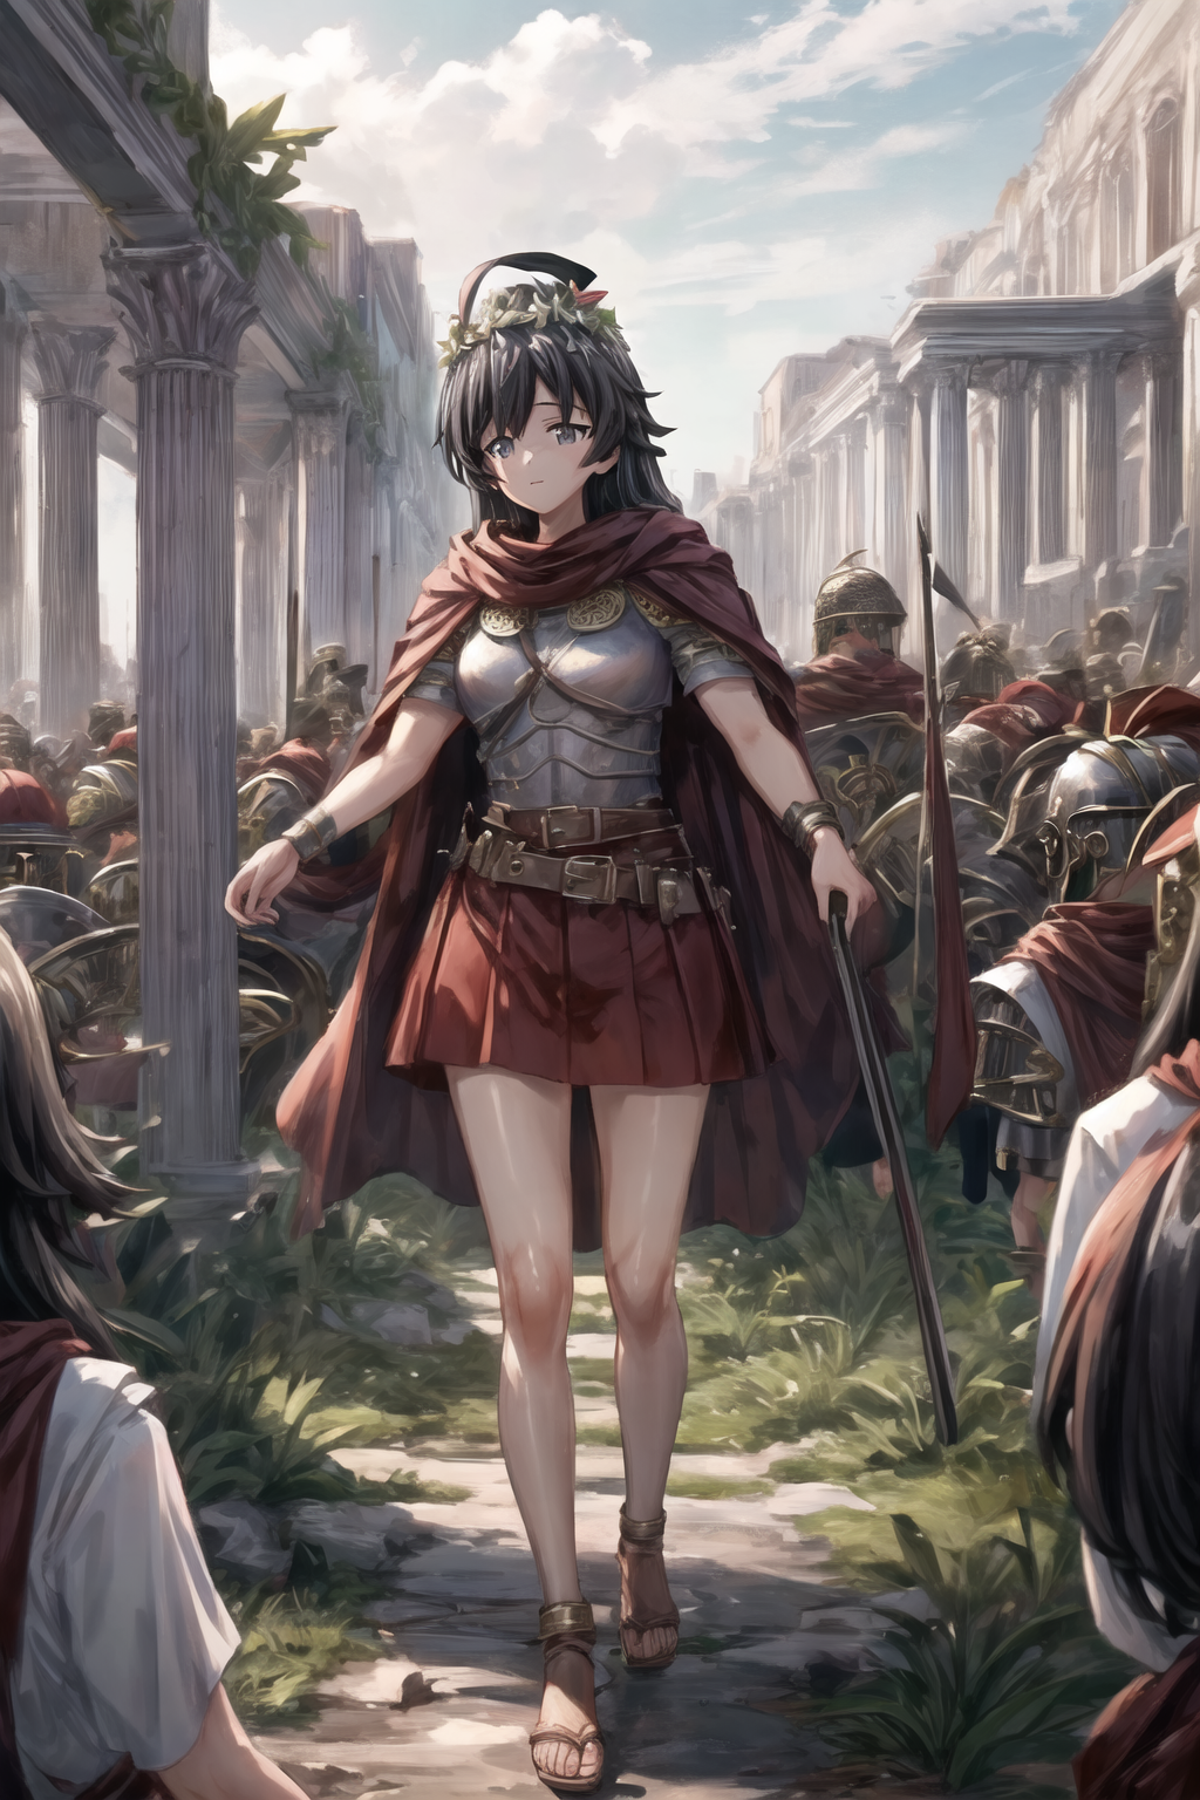 Fantastic Rome image by anonymoose1234